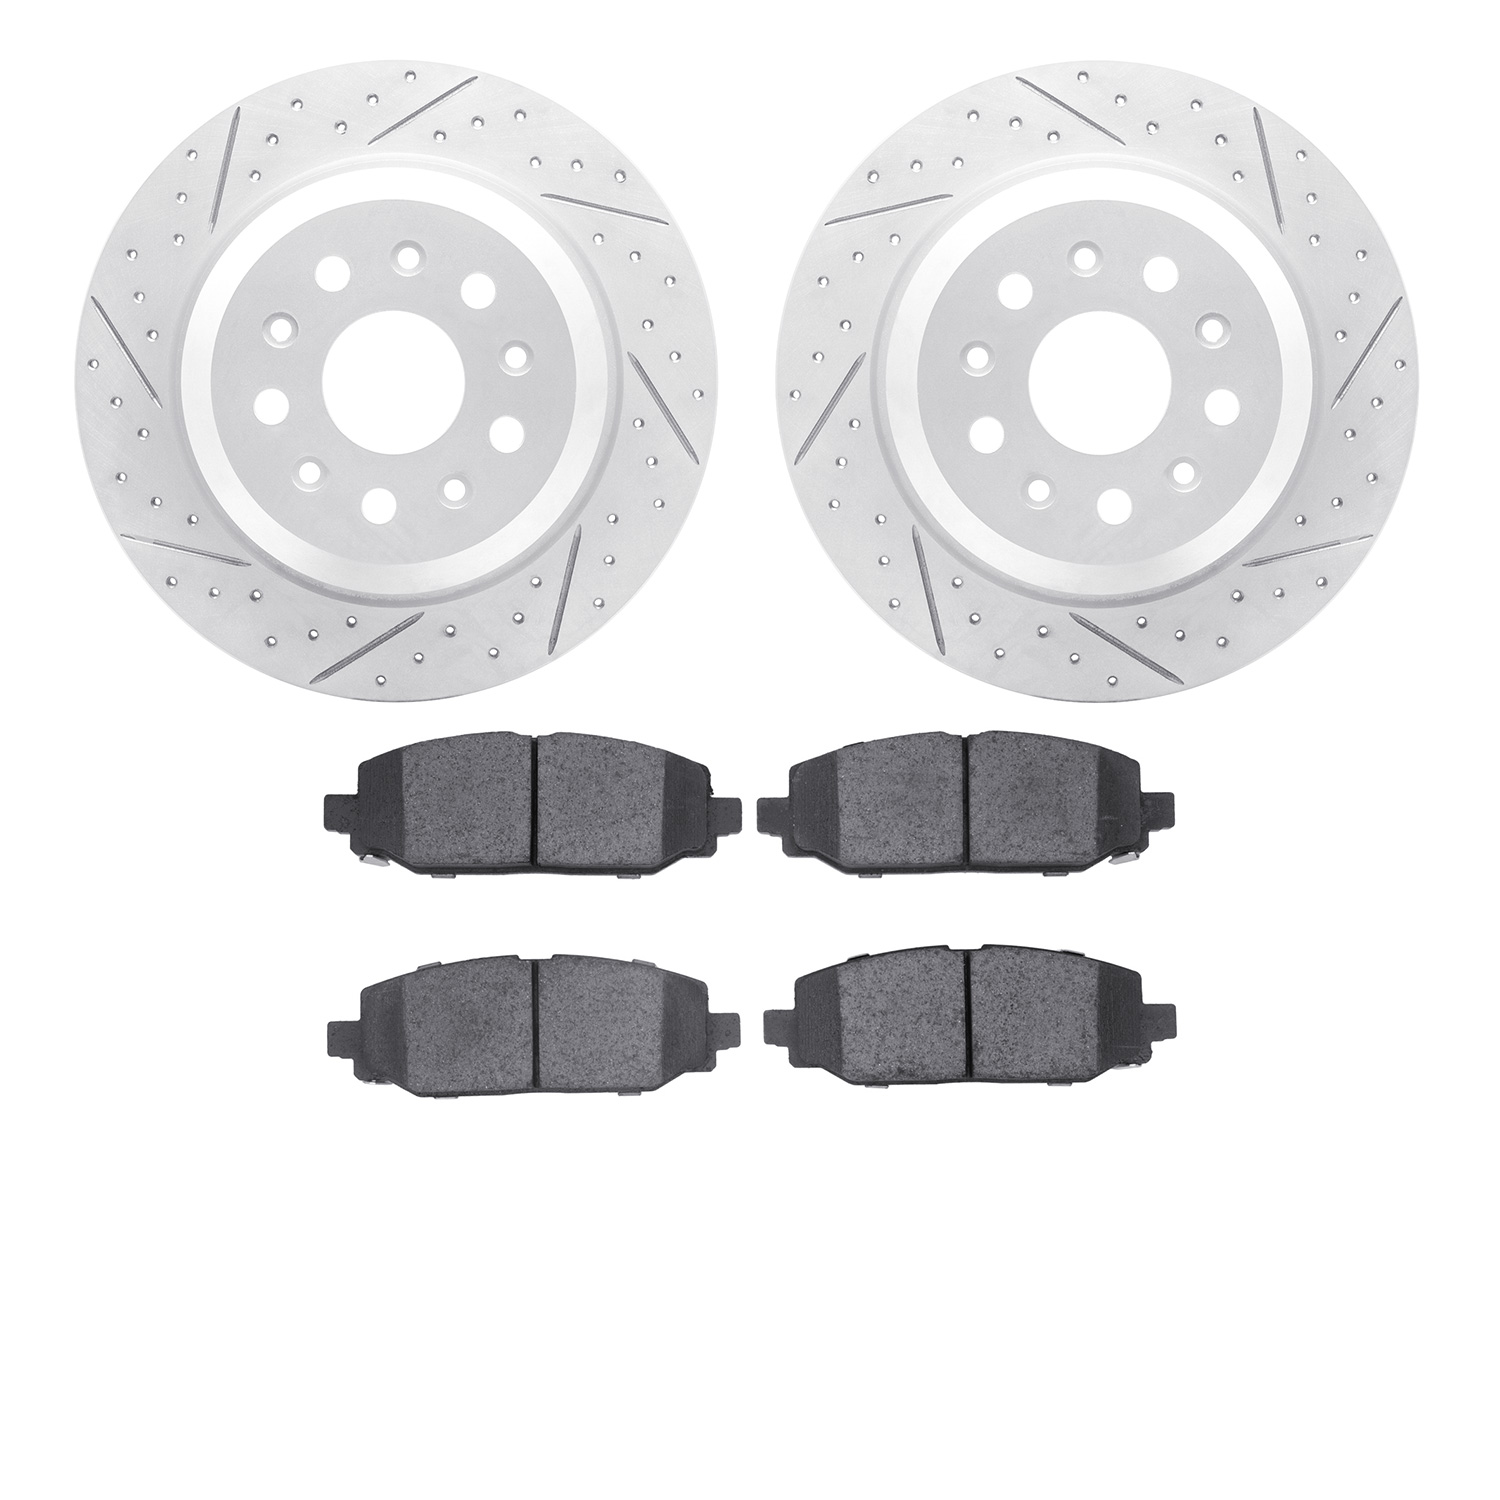 2402-42033 Geoperformance Drilled/Slotted Brake Rotors with Ultimate-Duty Brake Pads Kit, Fits Select Mopar, Position: Rear